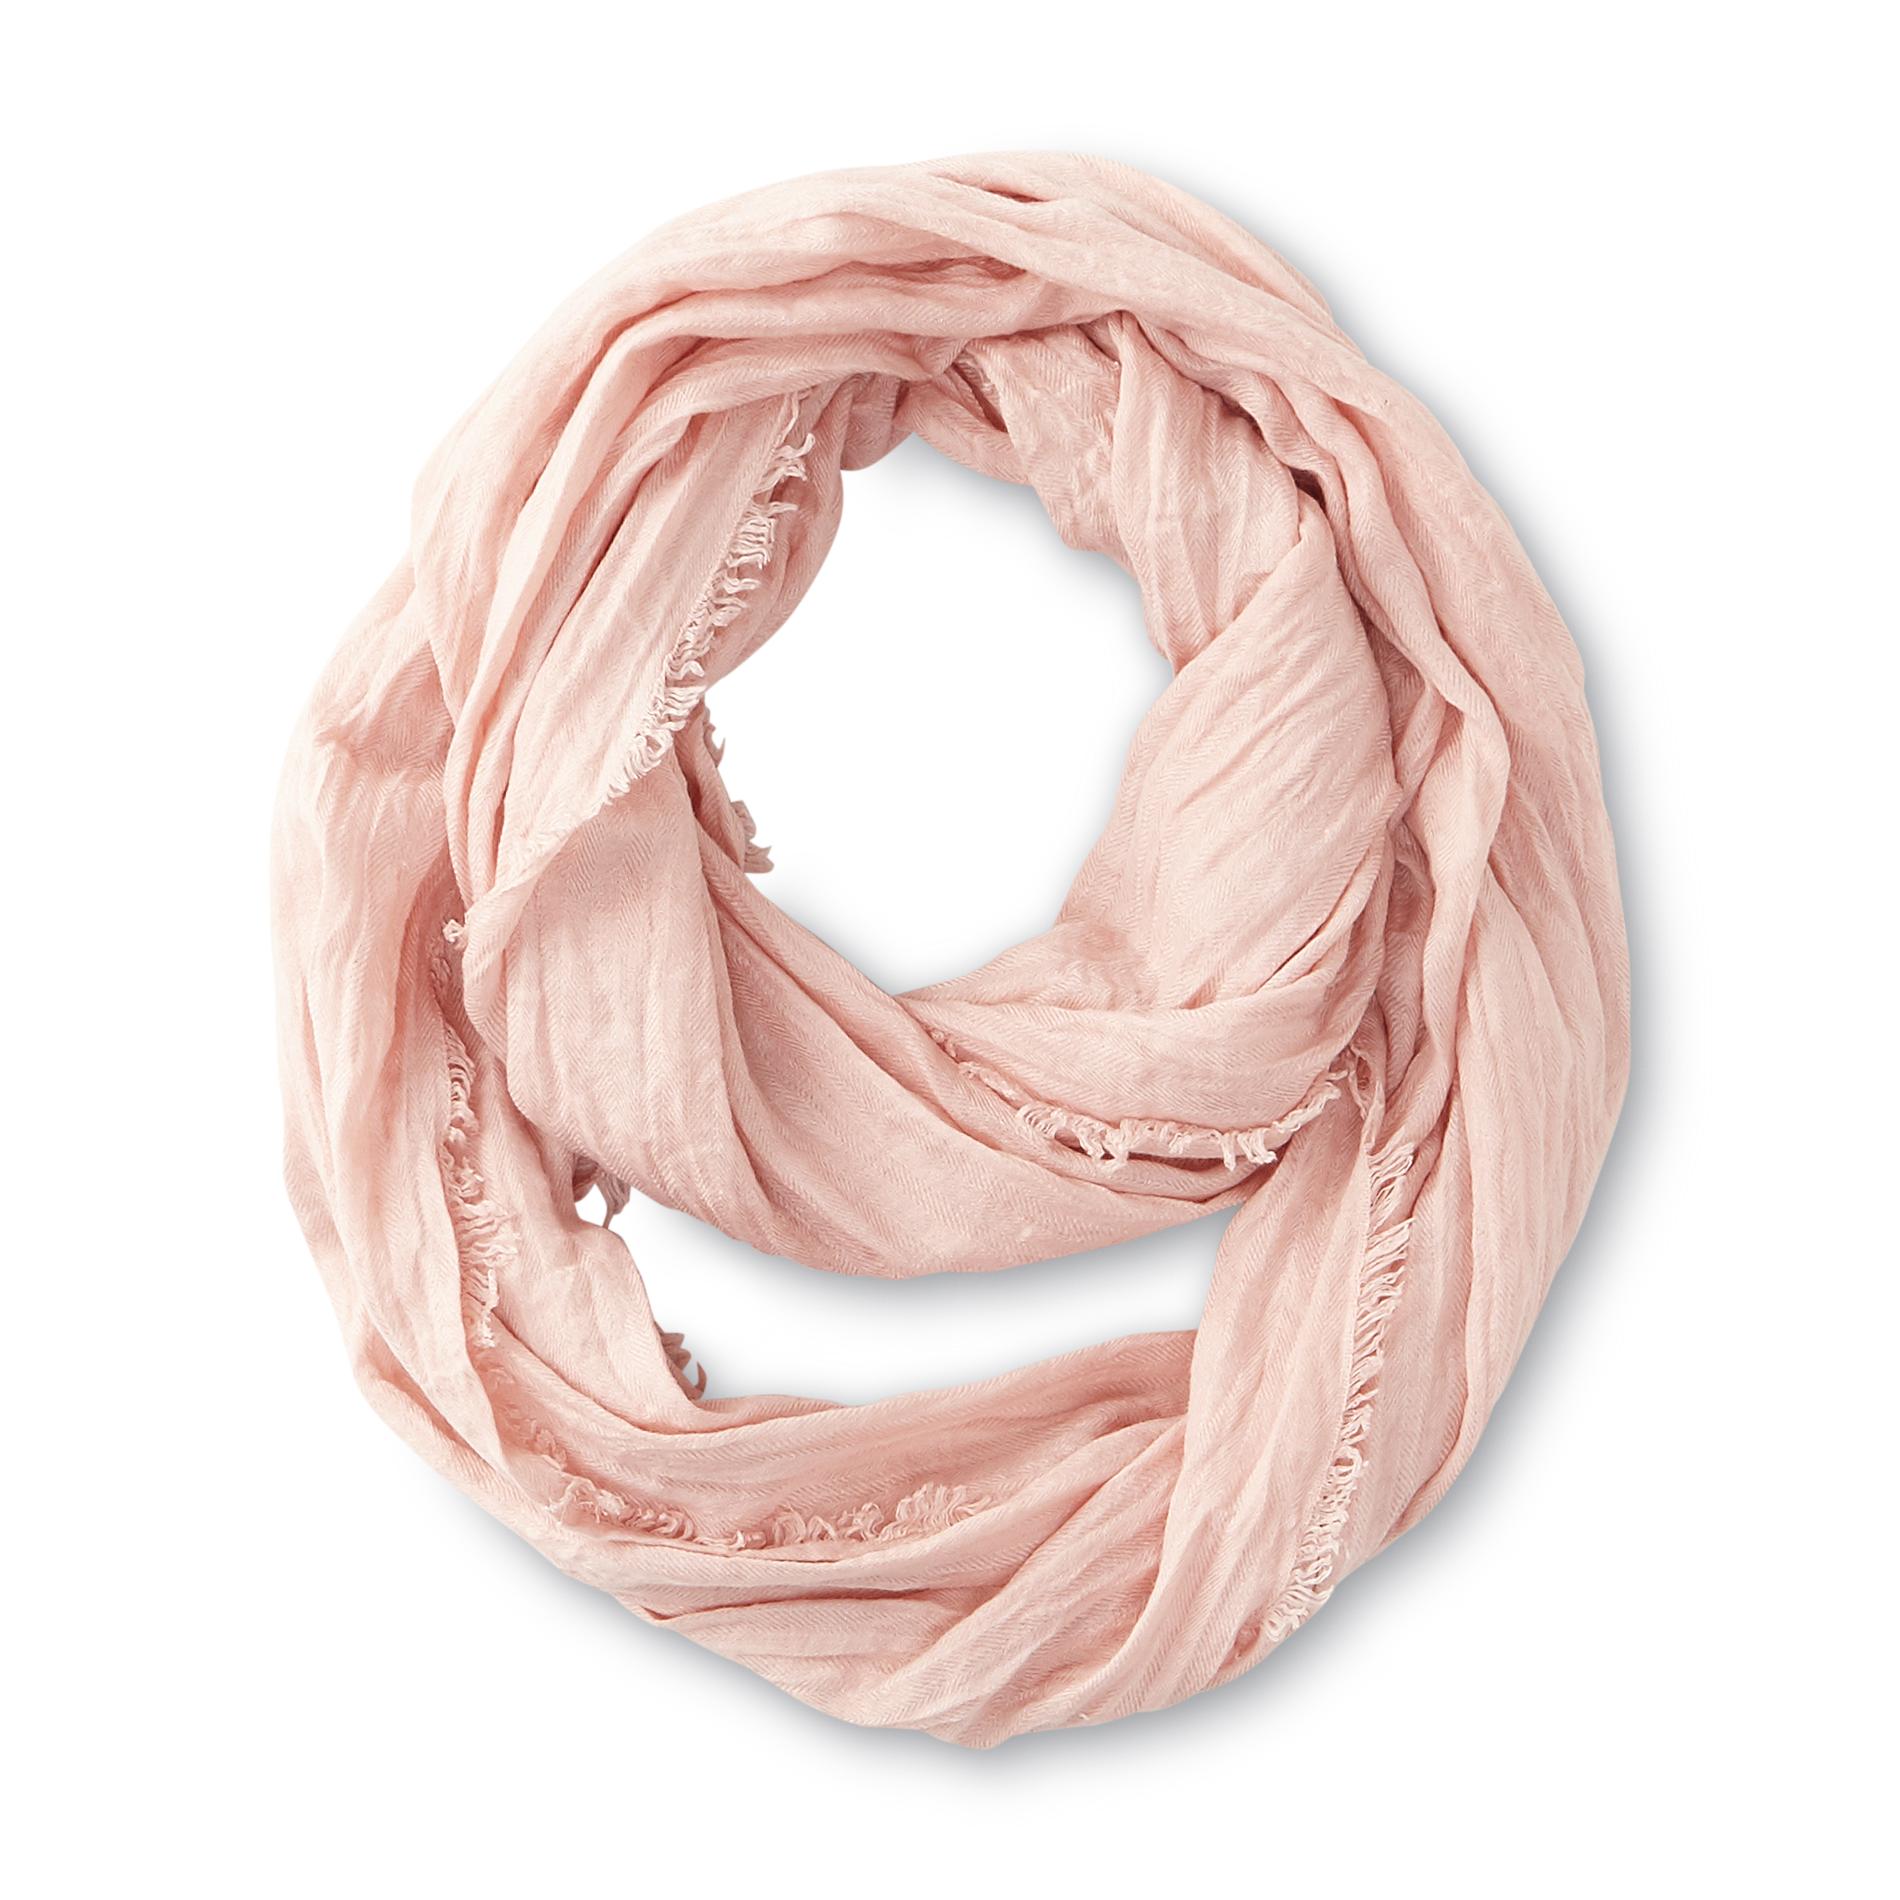 Simply Styled Women's Textured Infinity Scarf